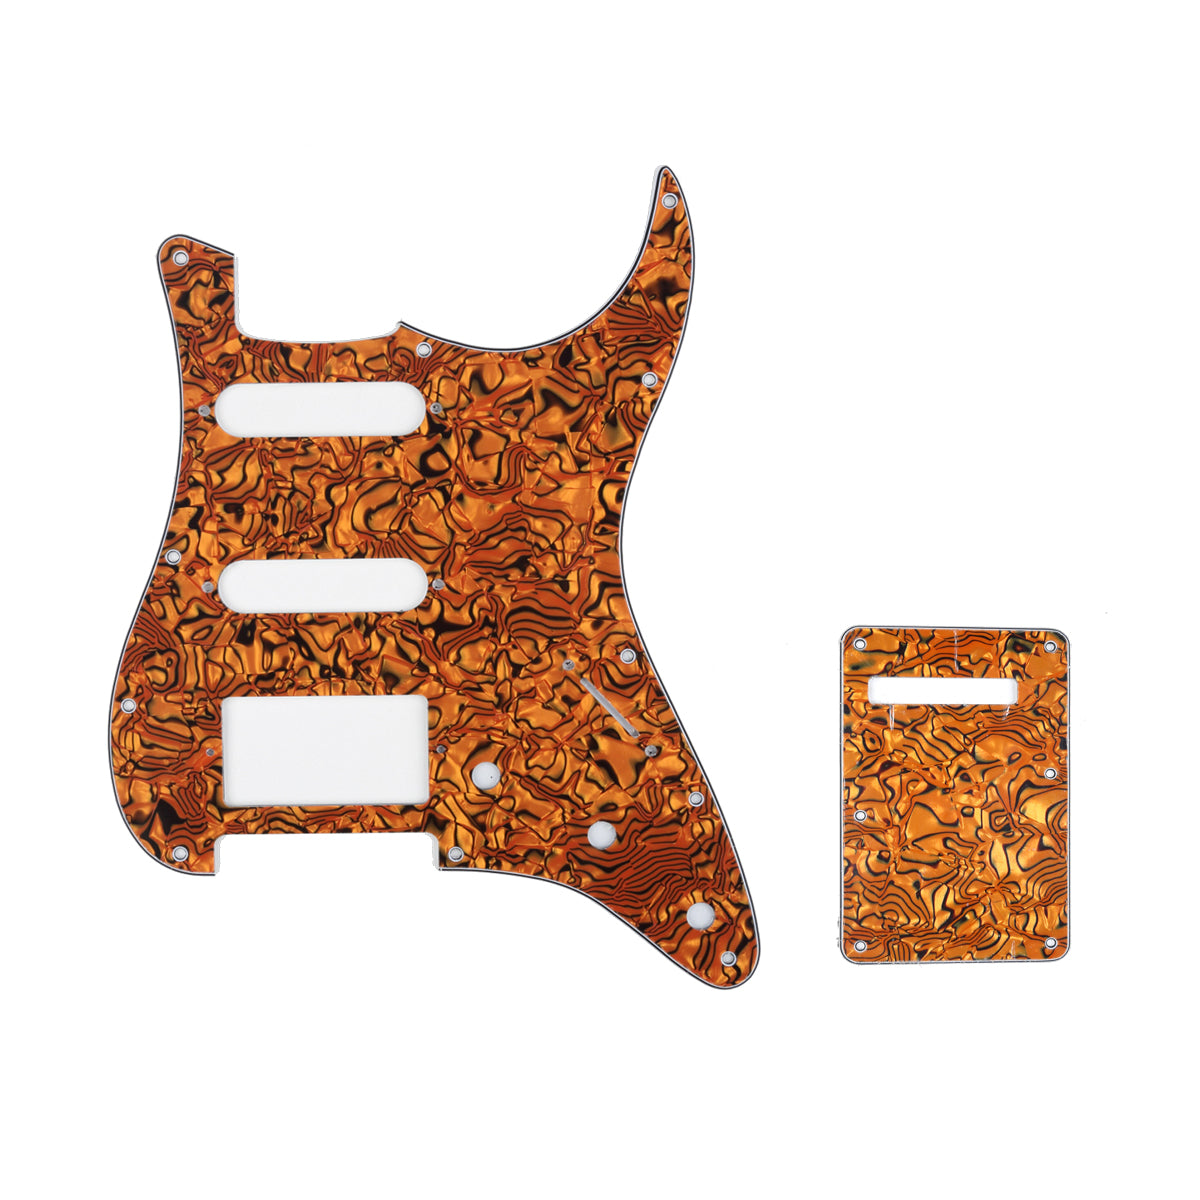 Musiclily SSH 11 Hole Strat Guitar Pickguard and BackPlate Set for Fender USA/Mexican Standard Stratocaster Modern Style, 4Ply Tiger Spot Shell